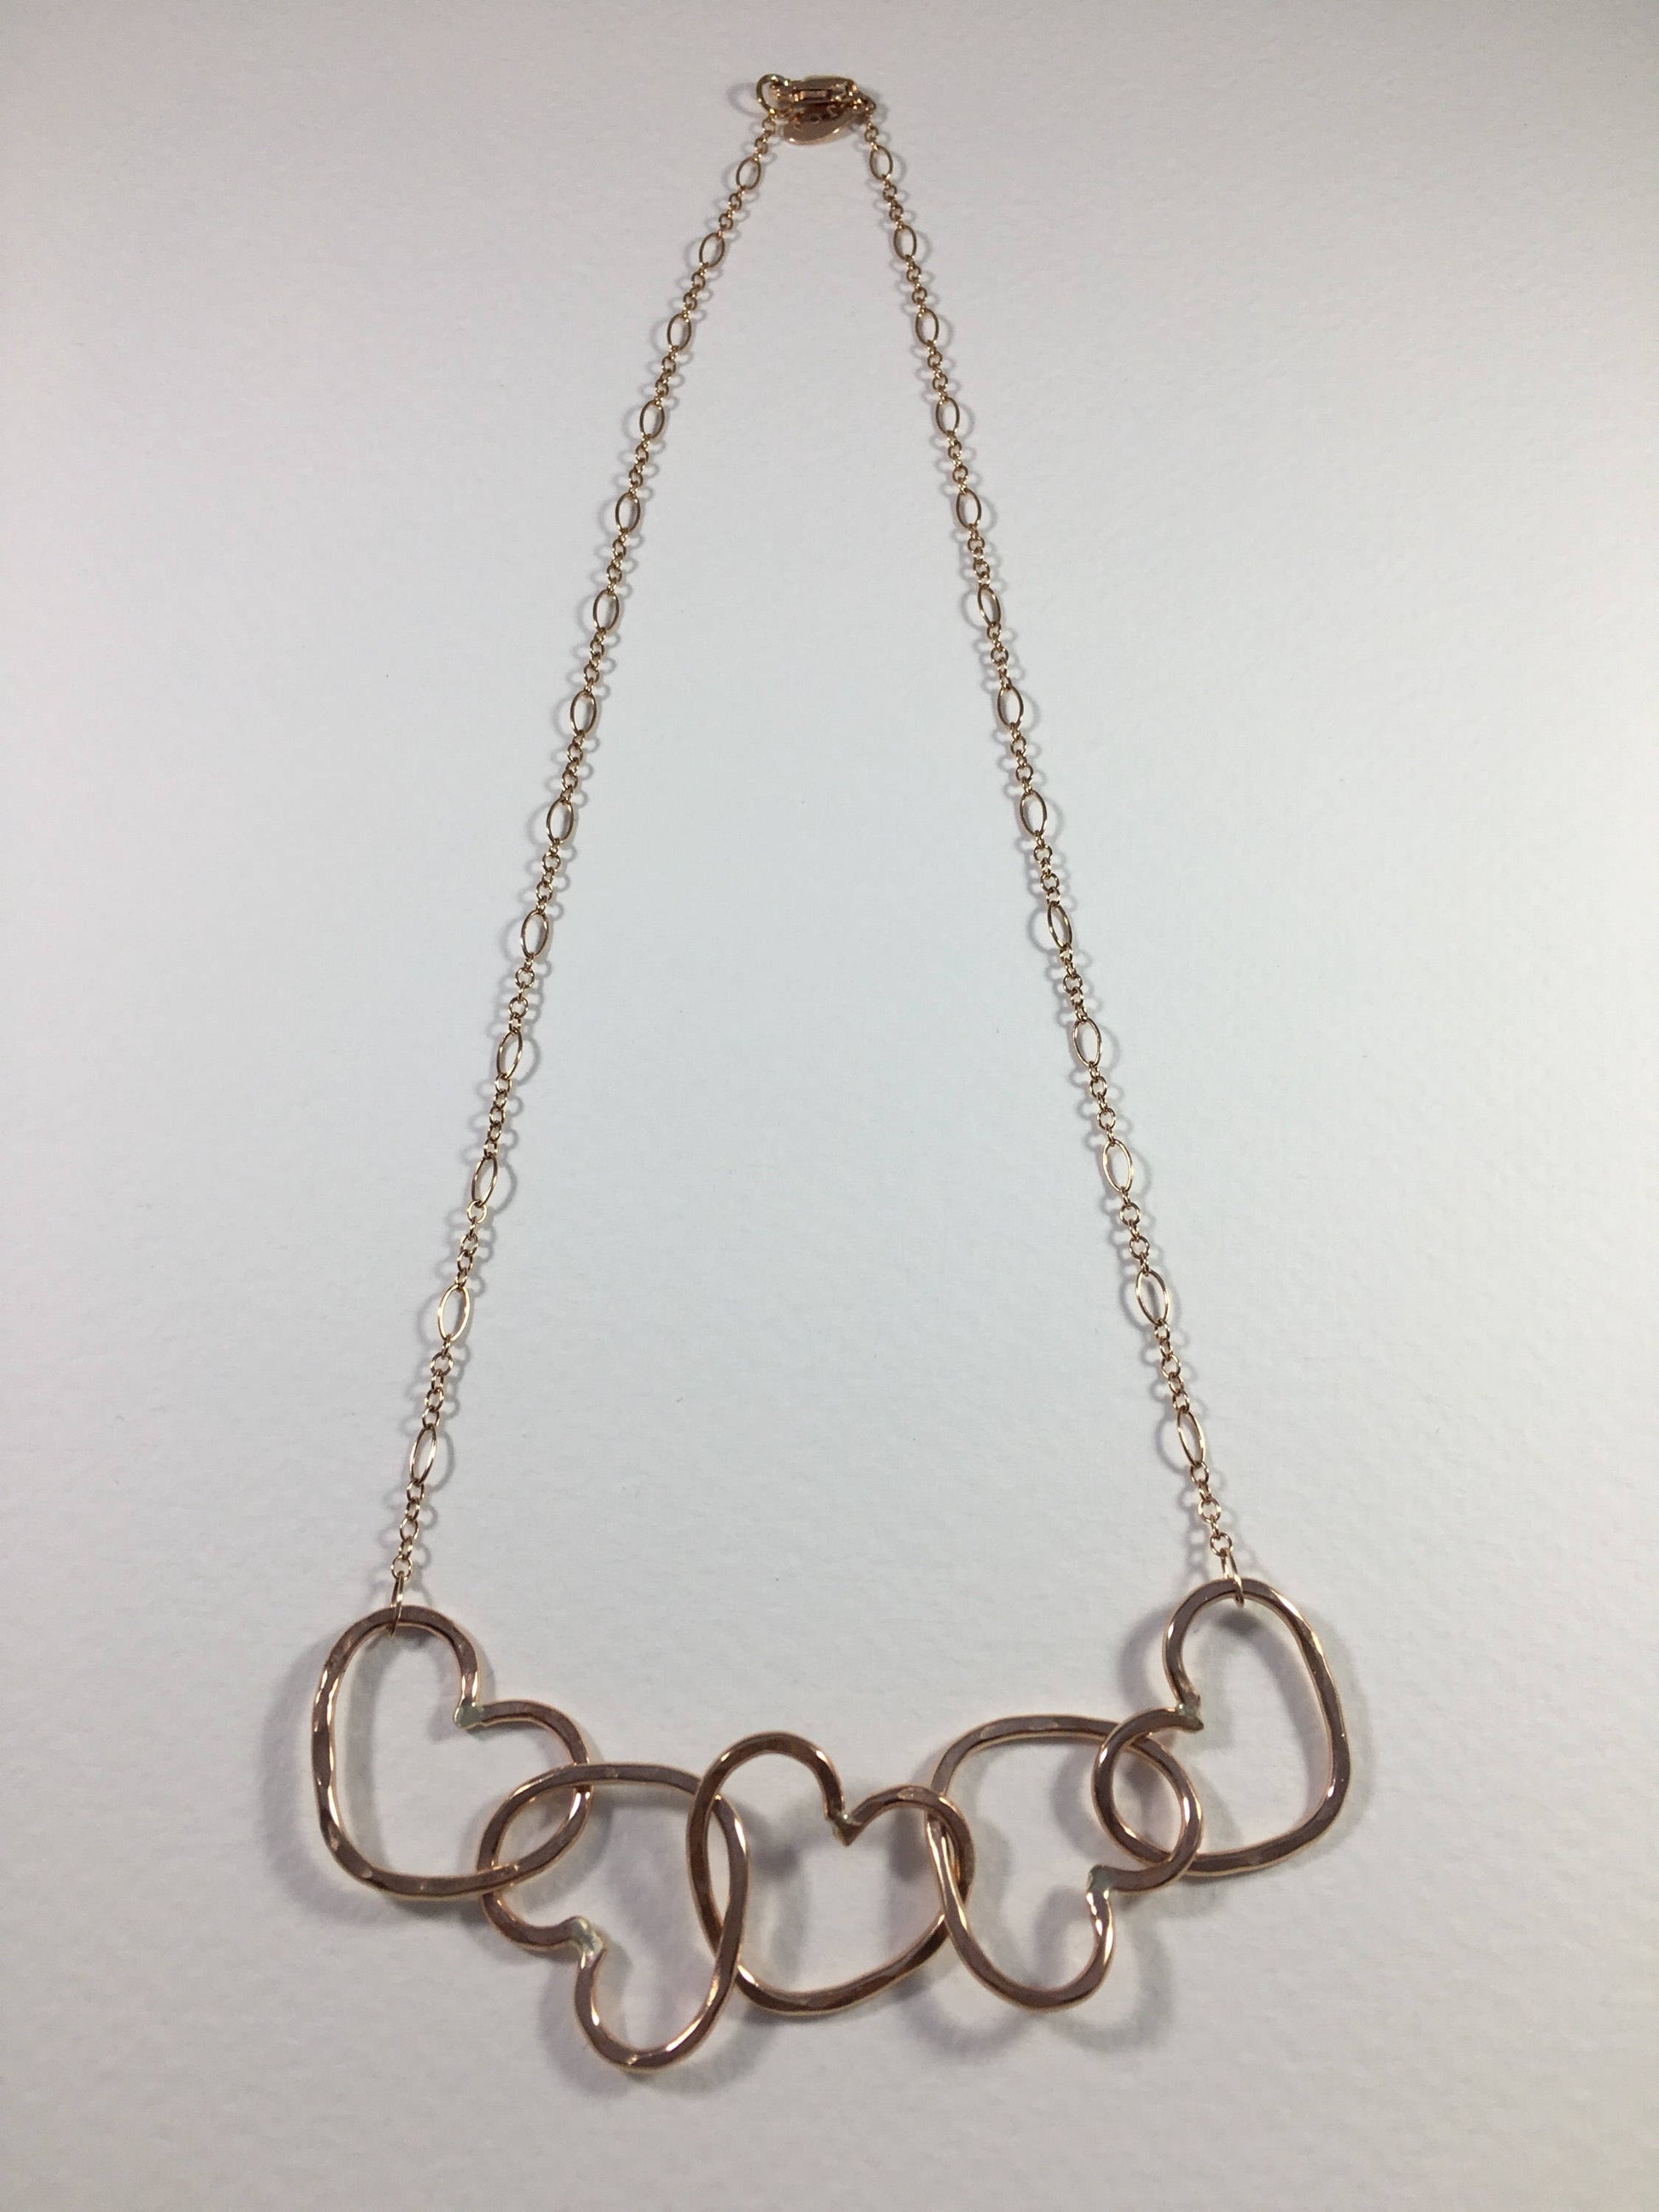 Five Linked Hearts Necklace 